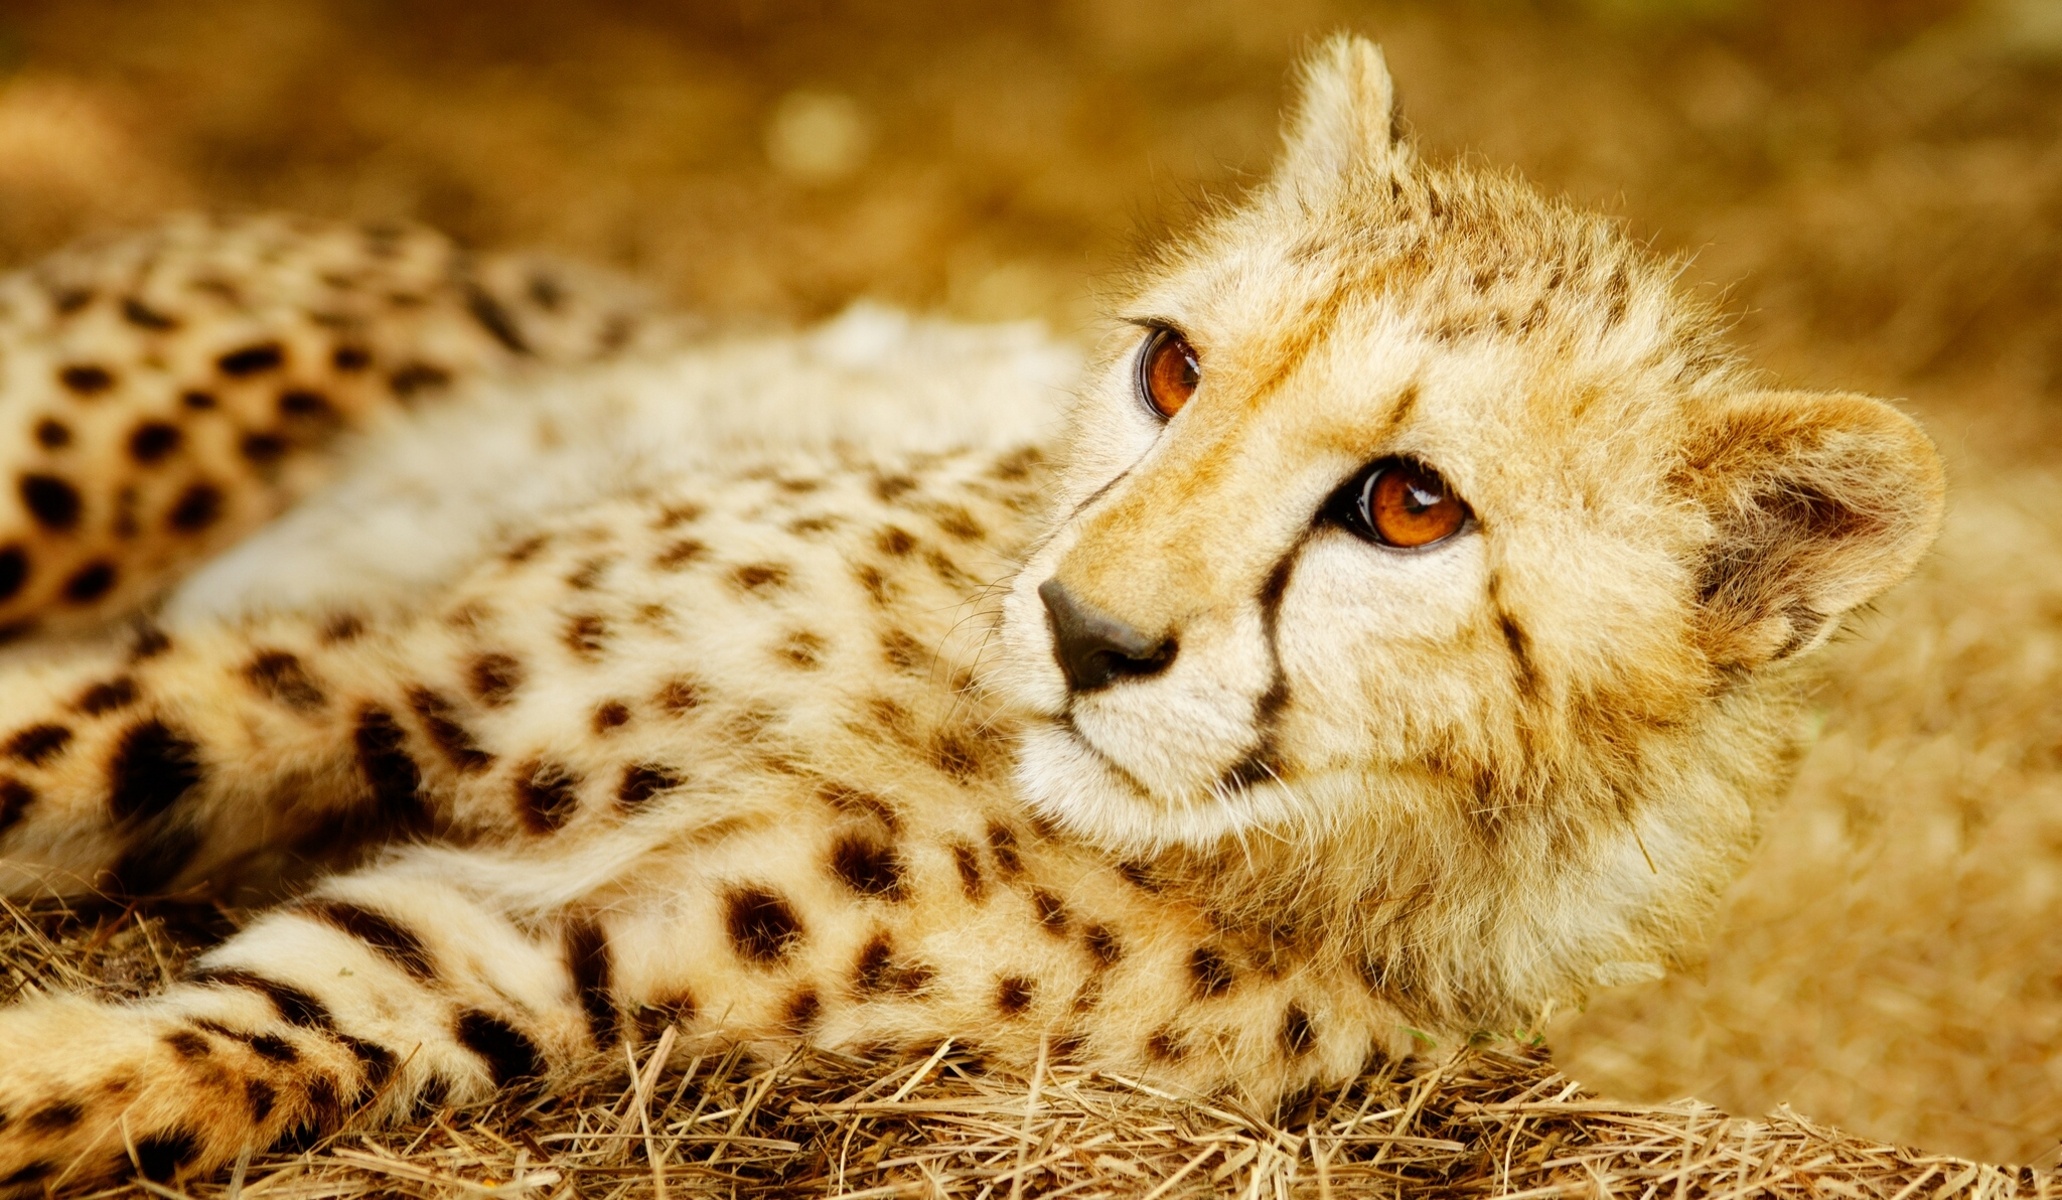 Cheetah wallpapers HD pictures images download.